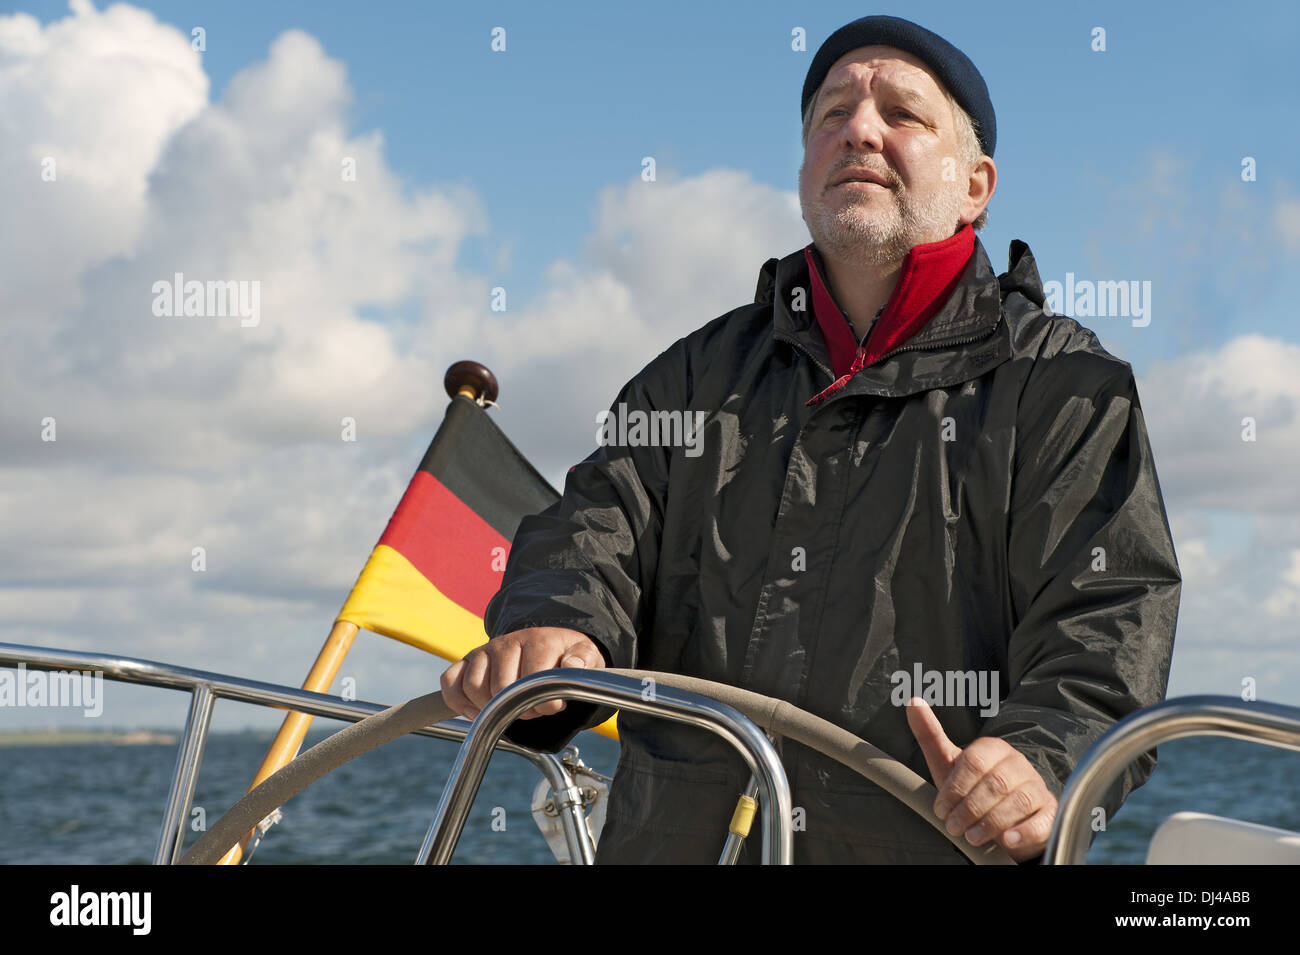 Skipper at the helm of his yacht Stock Photo